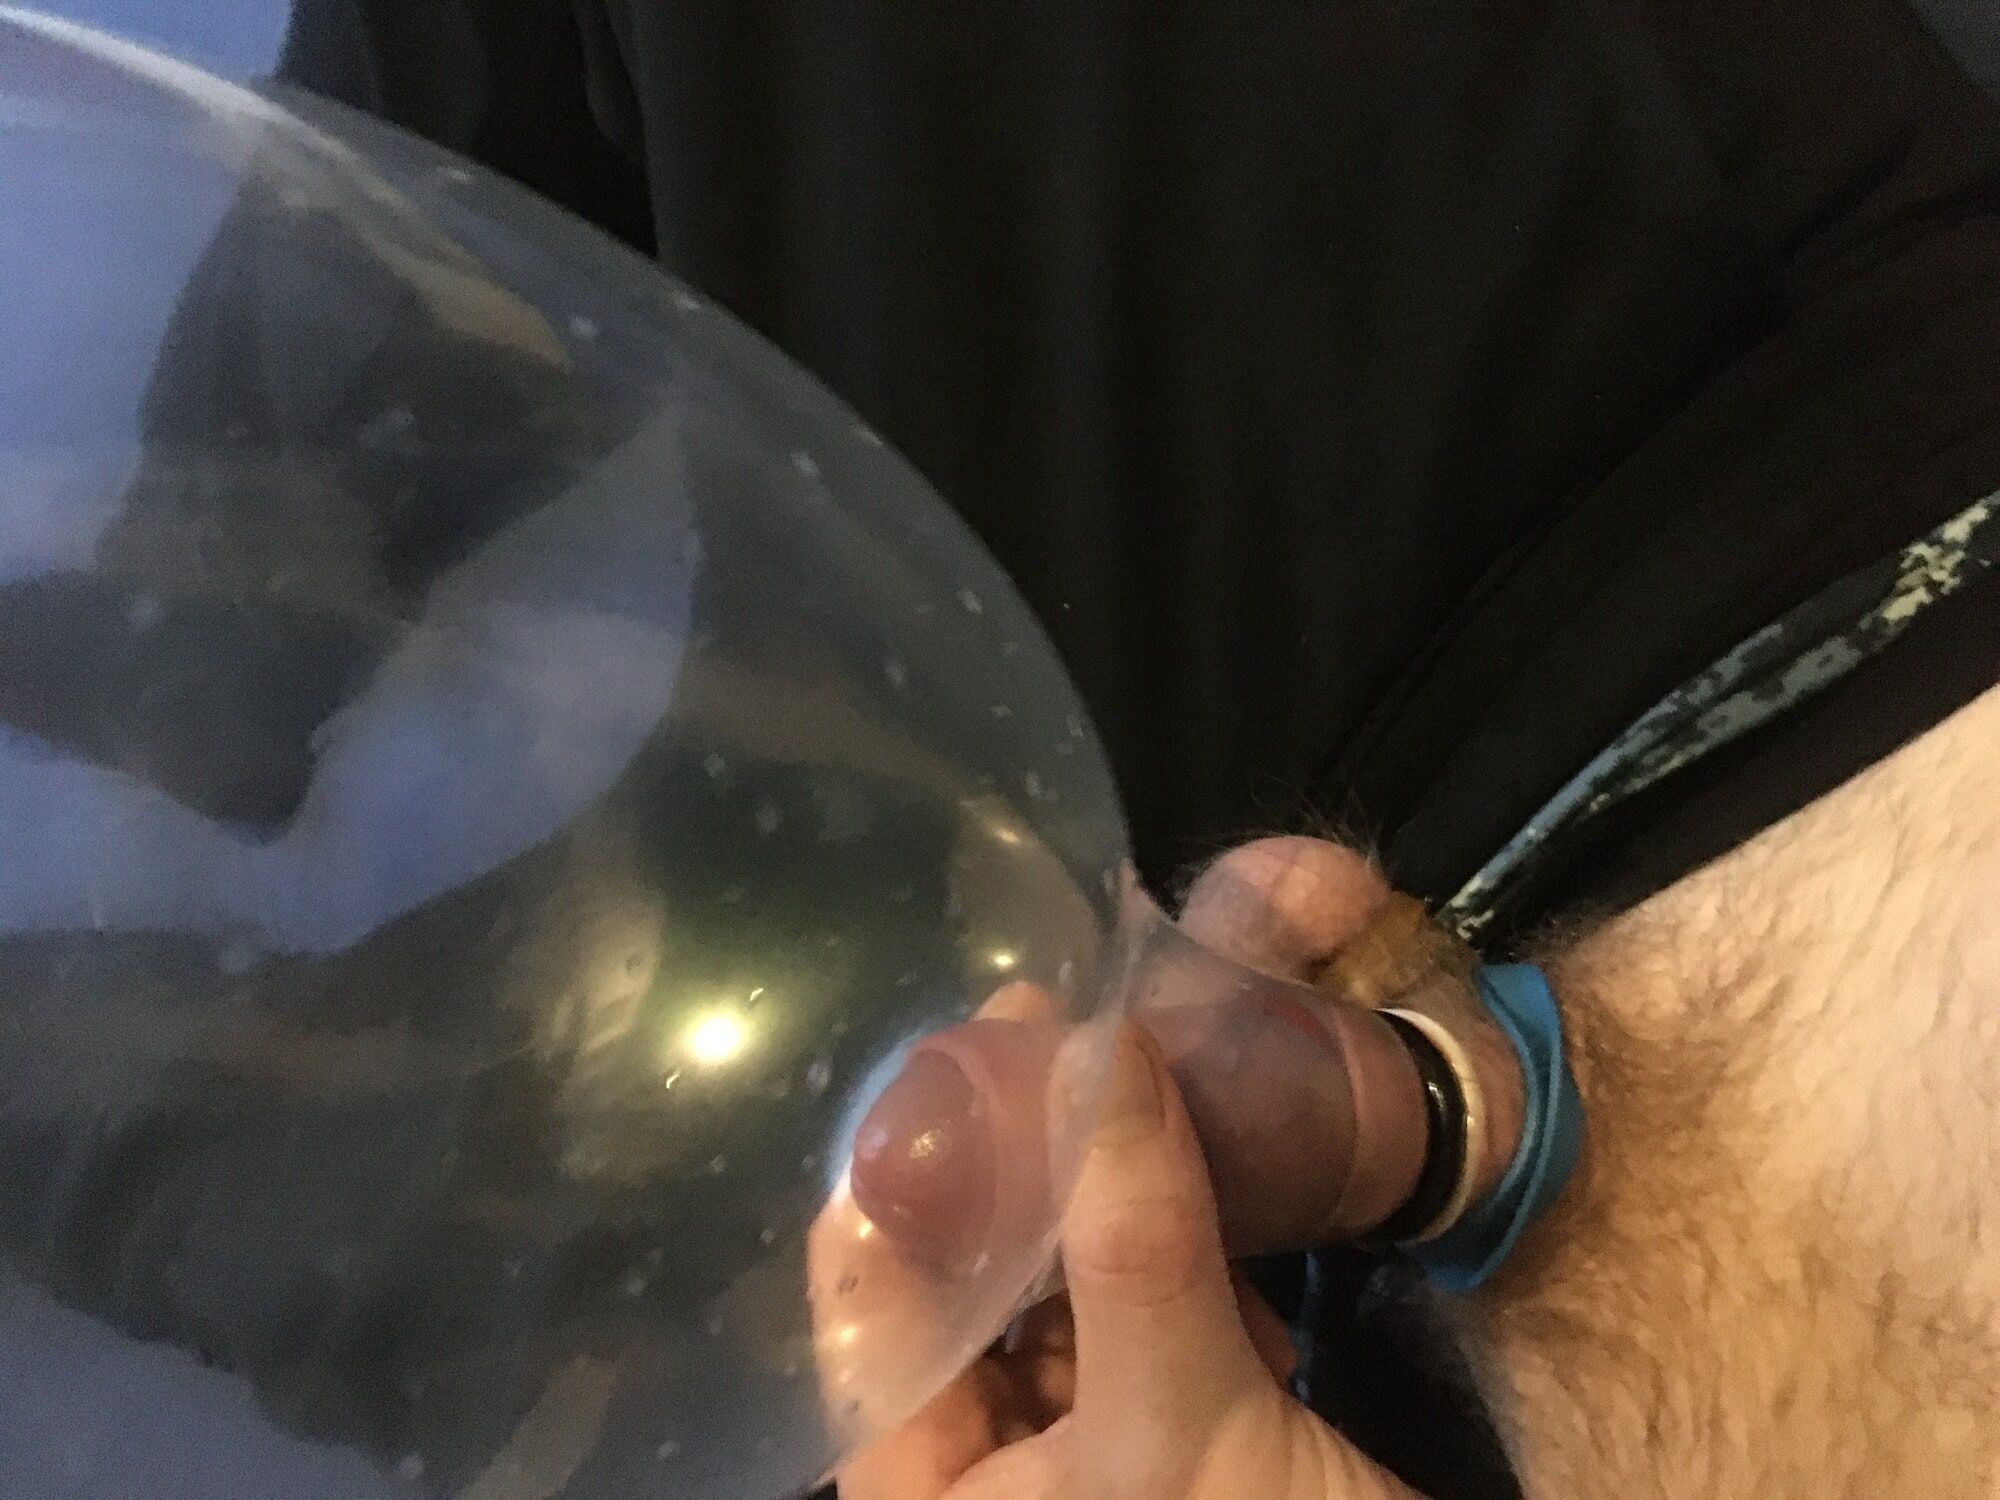  Haired Dick And Balls With Rubber Bands Condom Ballon  fuck #30